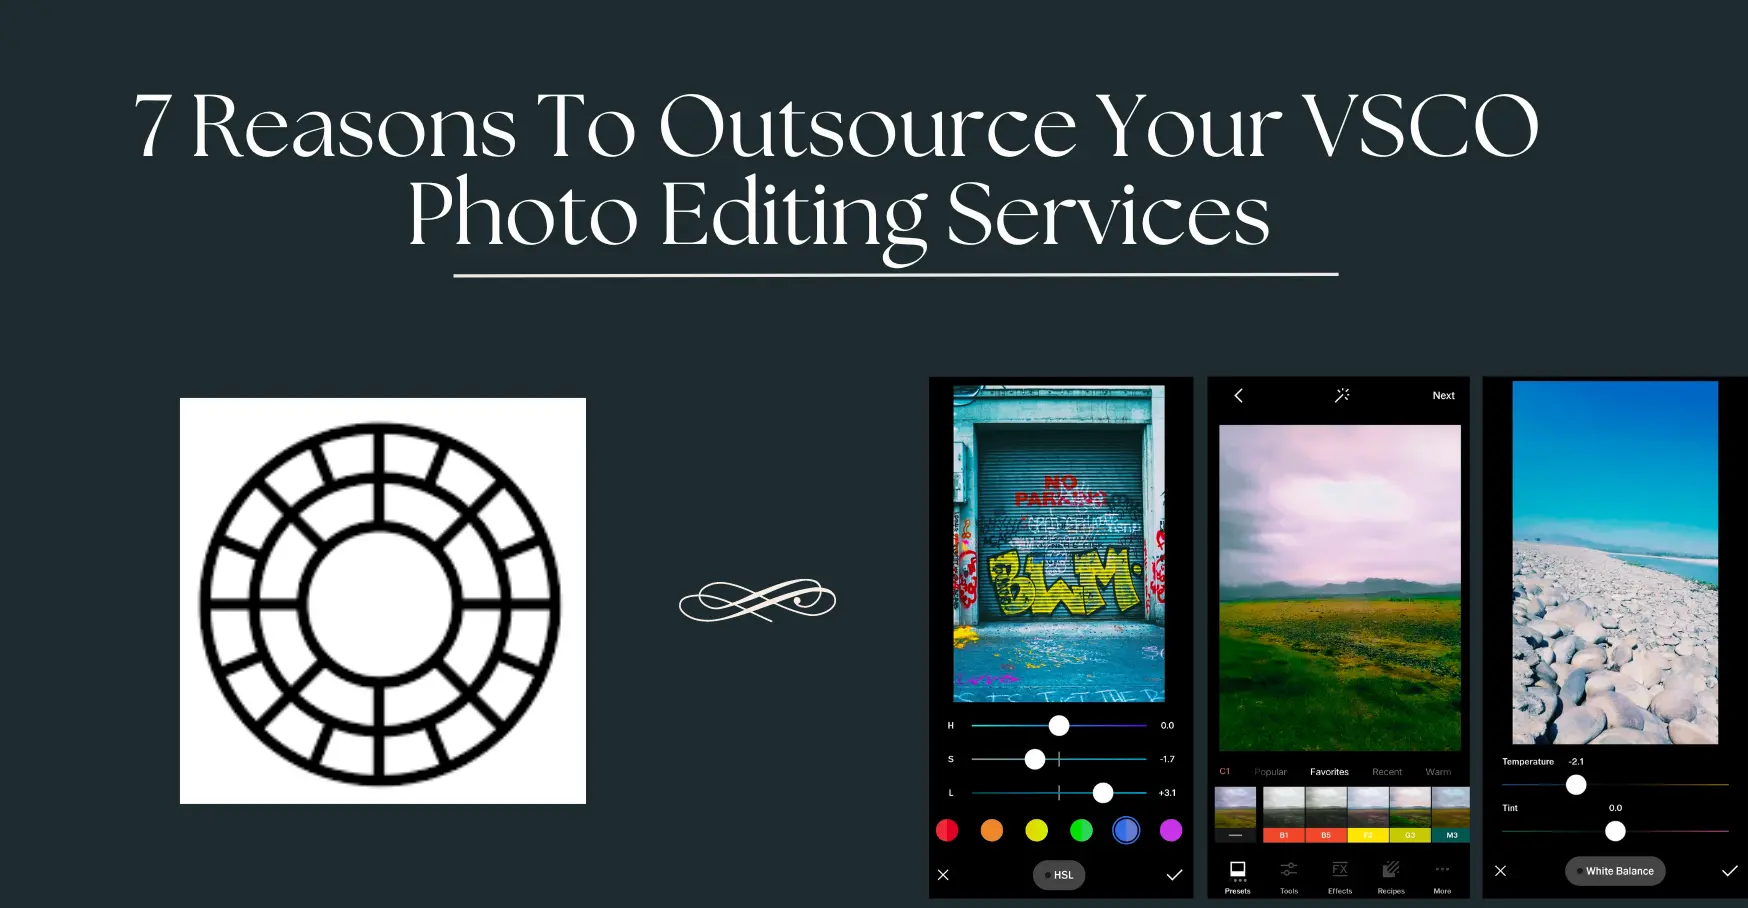 7 Reasons To Outsource your VSCO Photo Editing Services